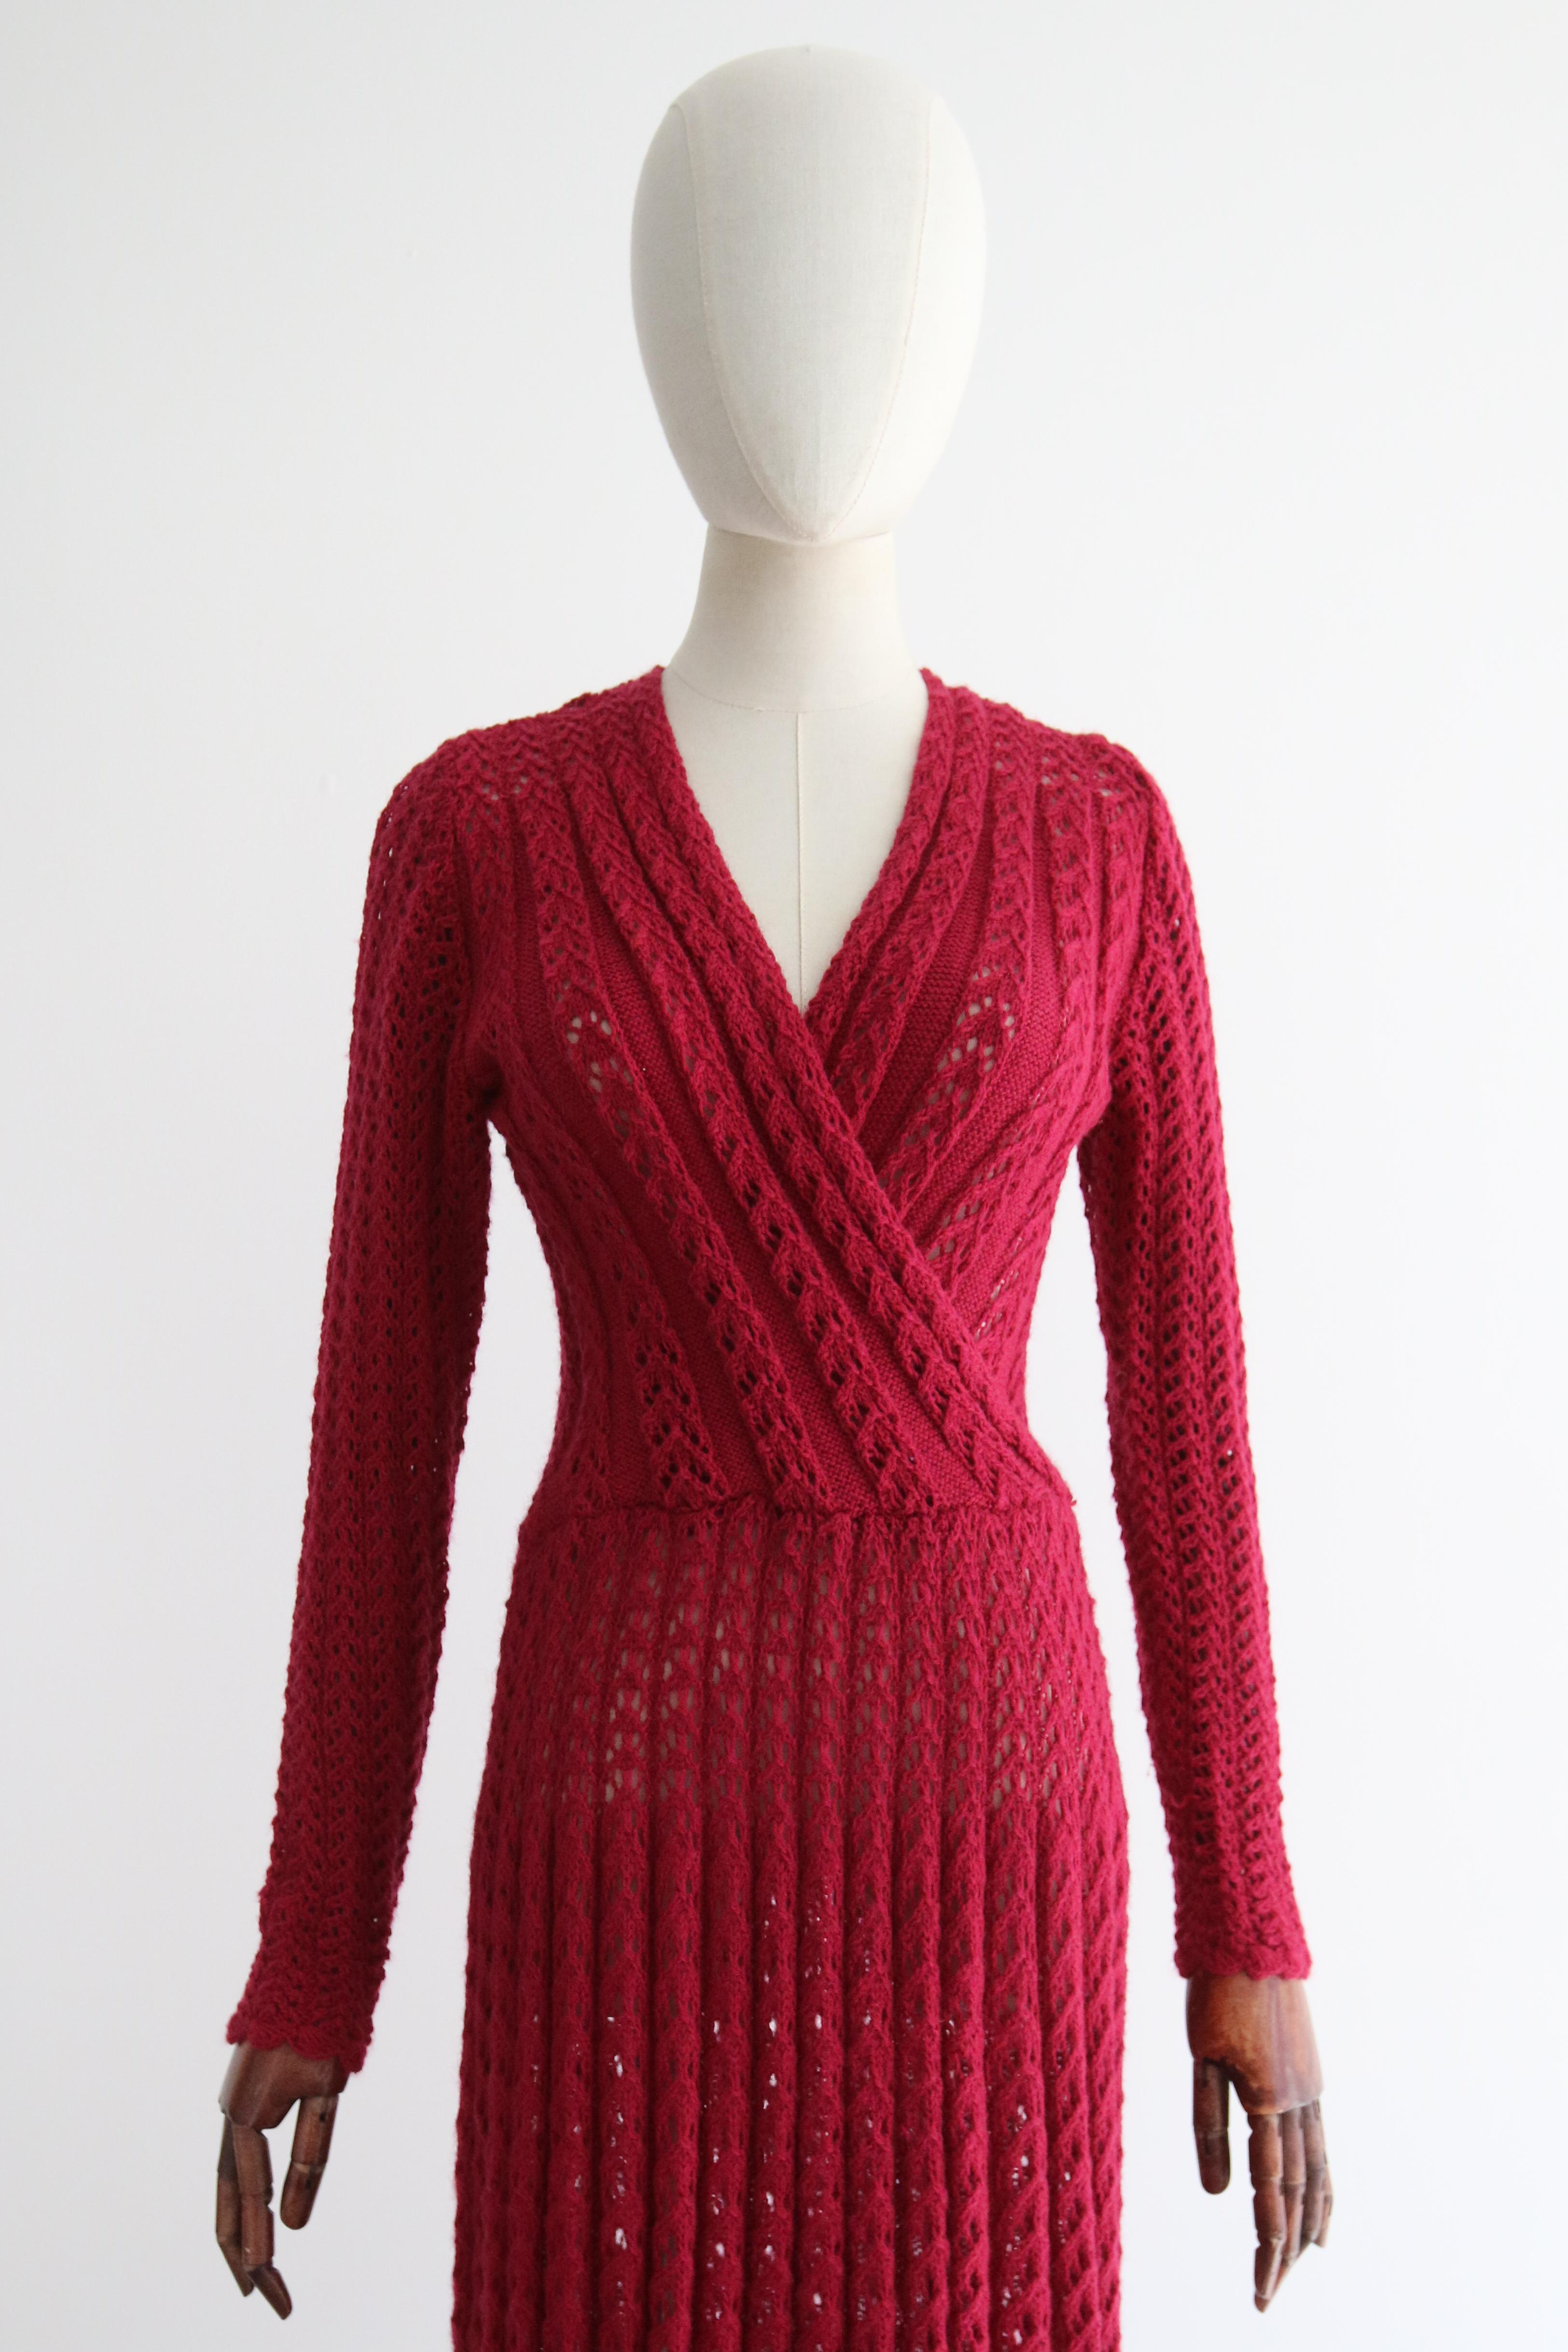 This incredible 1940's magenta knitted dress, rendered in a multitude of different knitted stitches, is just the piece for your transitional wardrobe. 

The deep V shaped neckline is framed by a cross over cut along the bodice which boasts lace